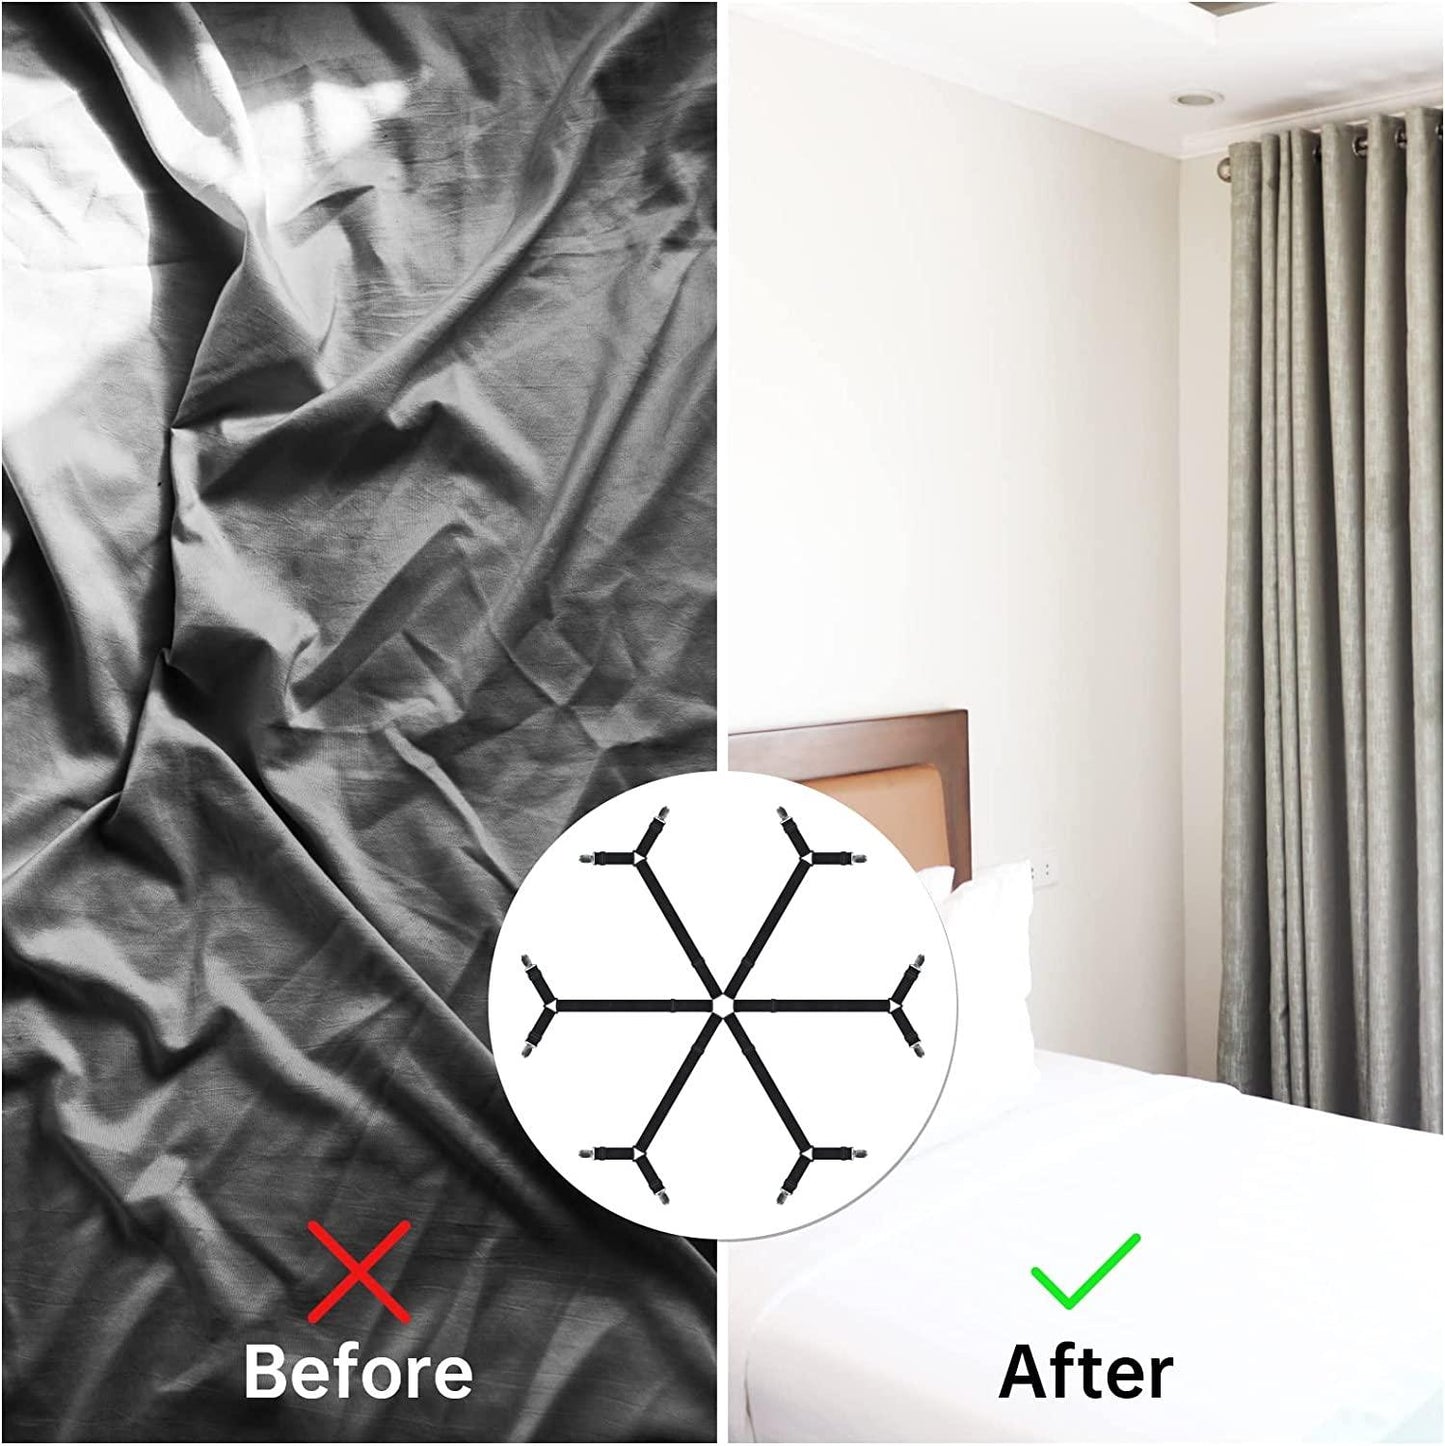 Elastic 6 Way Crisscross Bed Sheet Fasteners, No More Loose Bed Sheets! Adjustable for Single, Queen, King Mattress - Anjelstore 